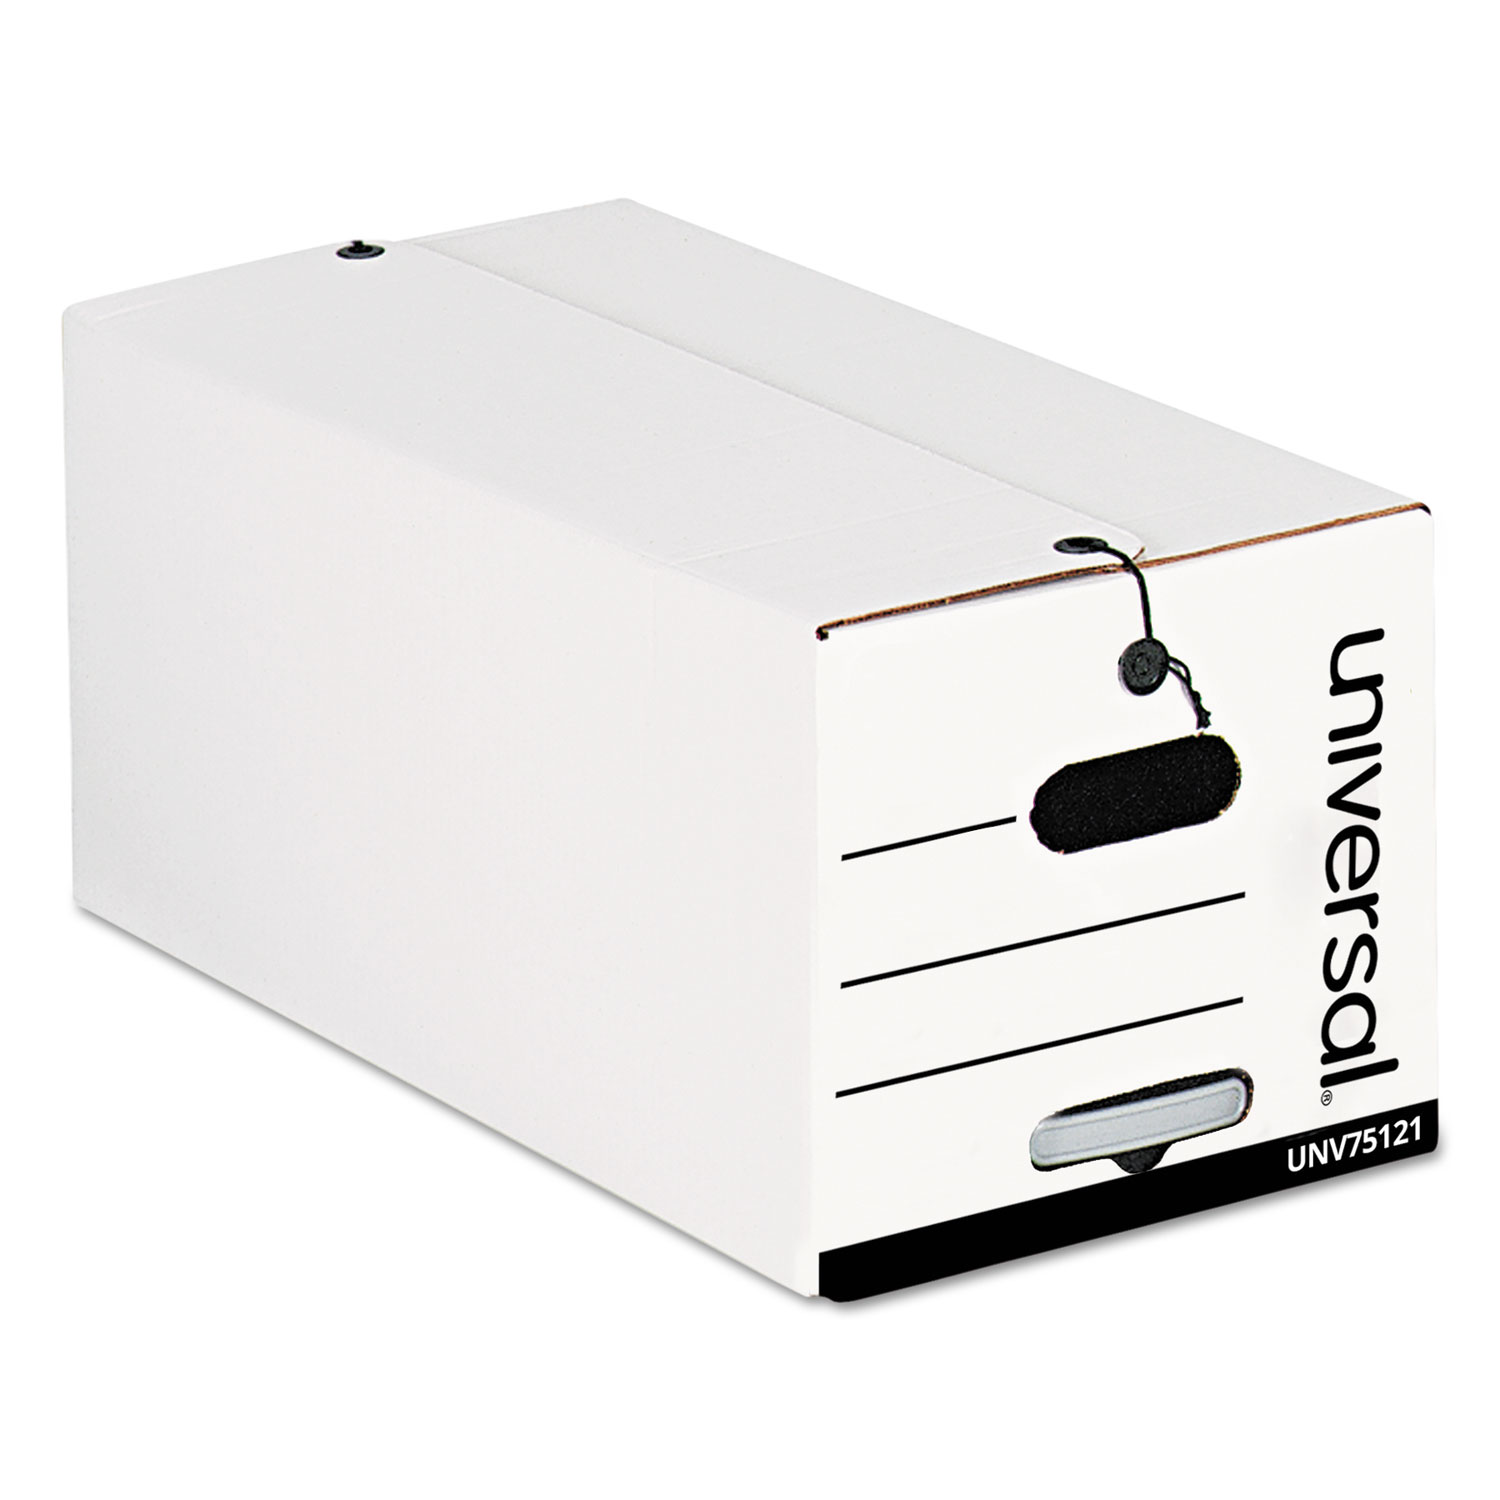  Universal 7512102 Deluxe Quick Set-up String-and-Button Boxes, Letter Files, White, 12/Carton (UNV75121) 